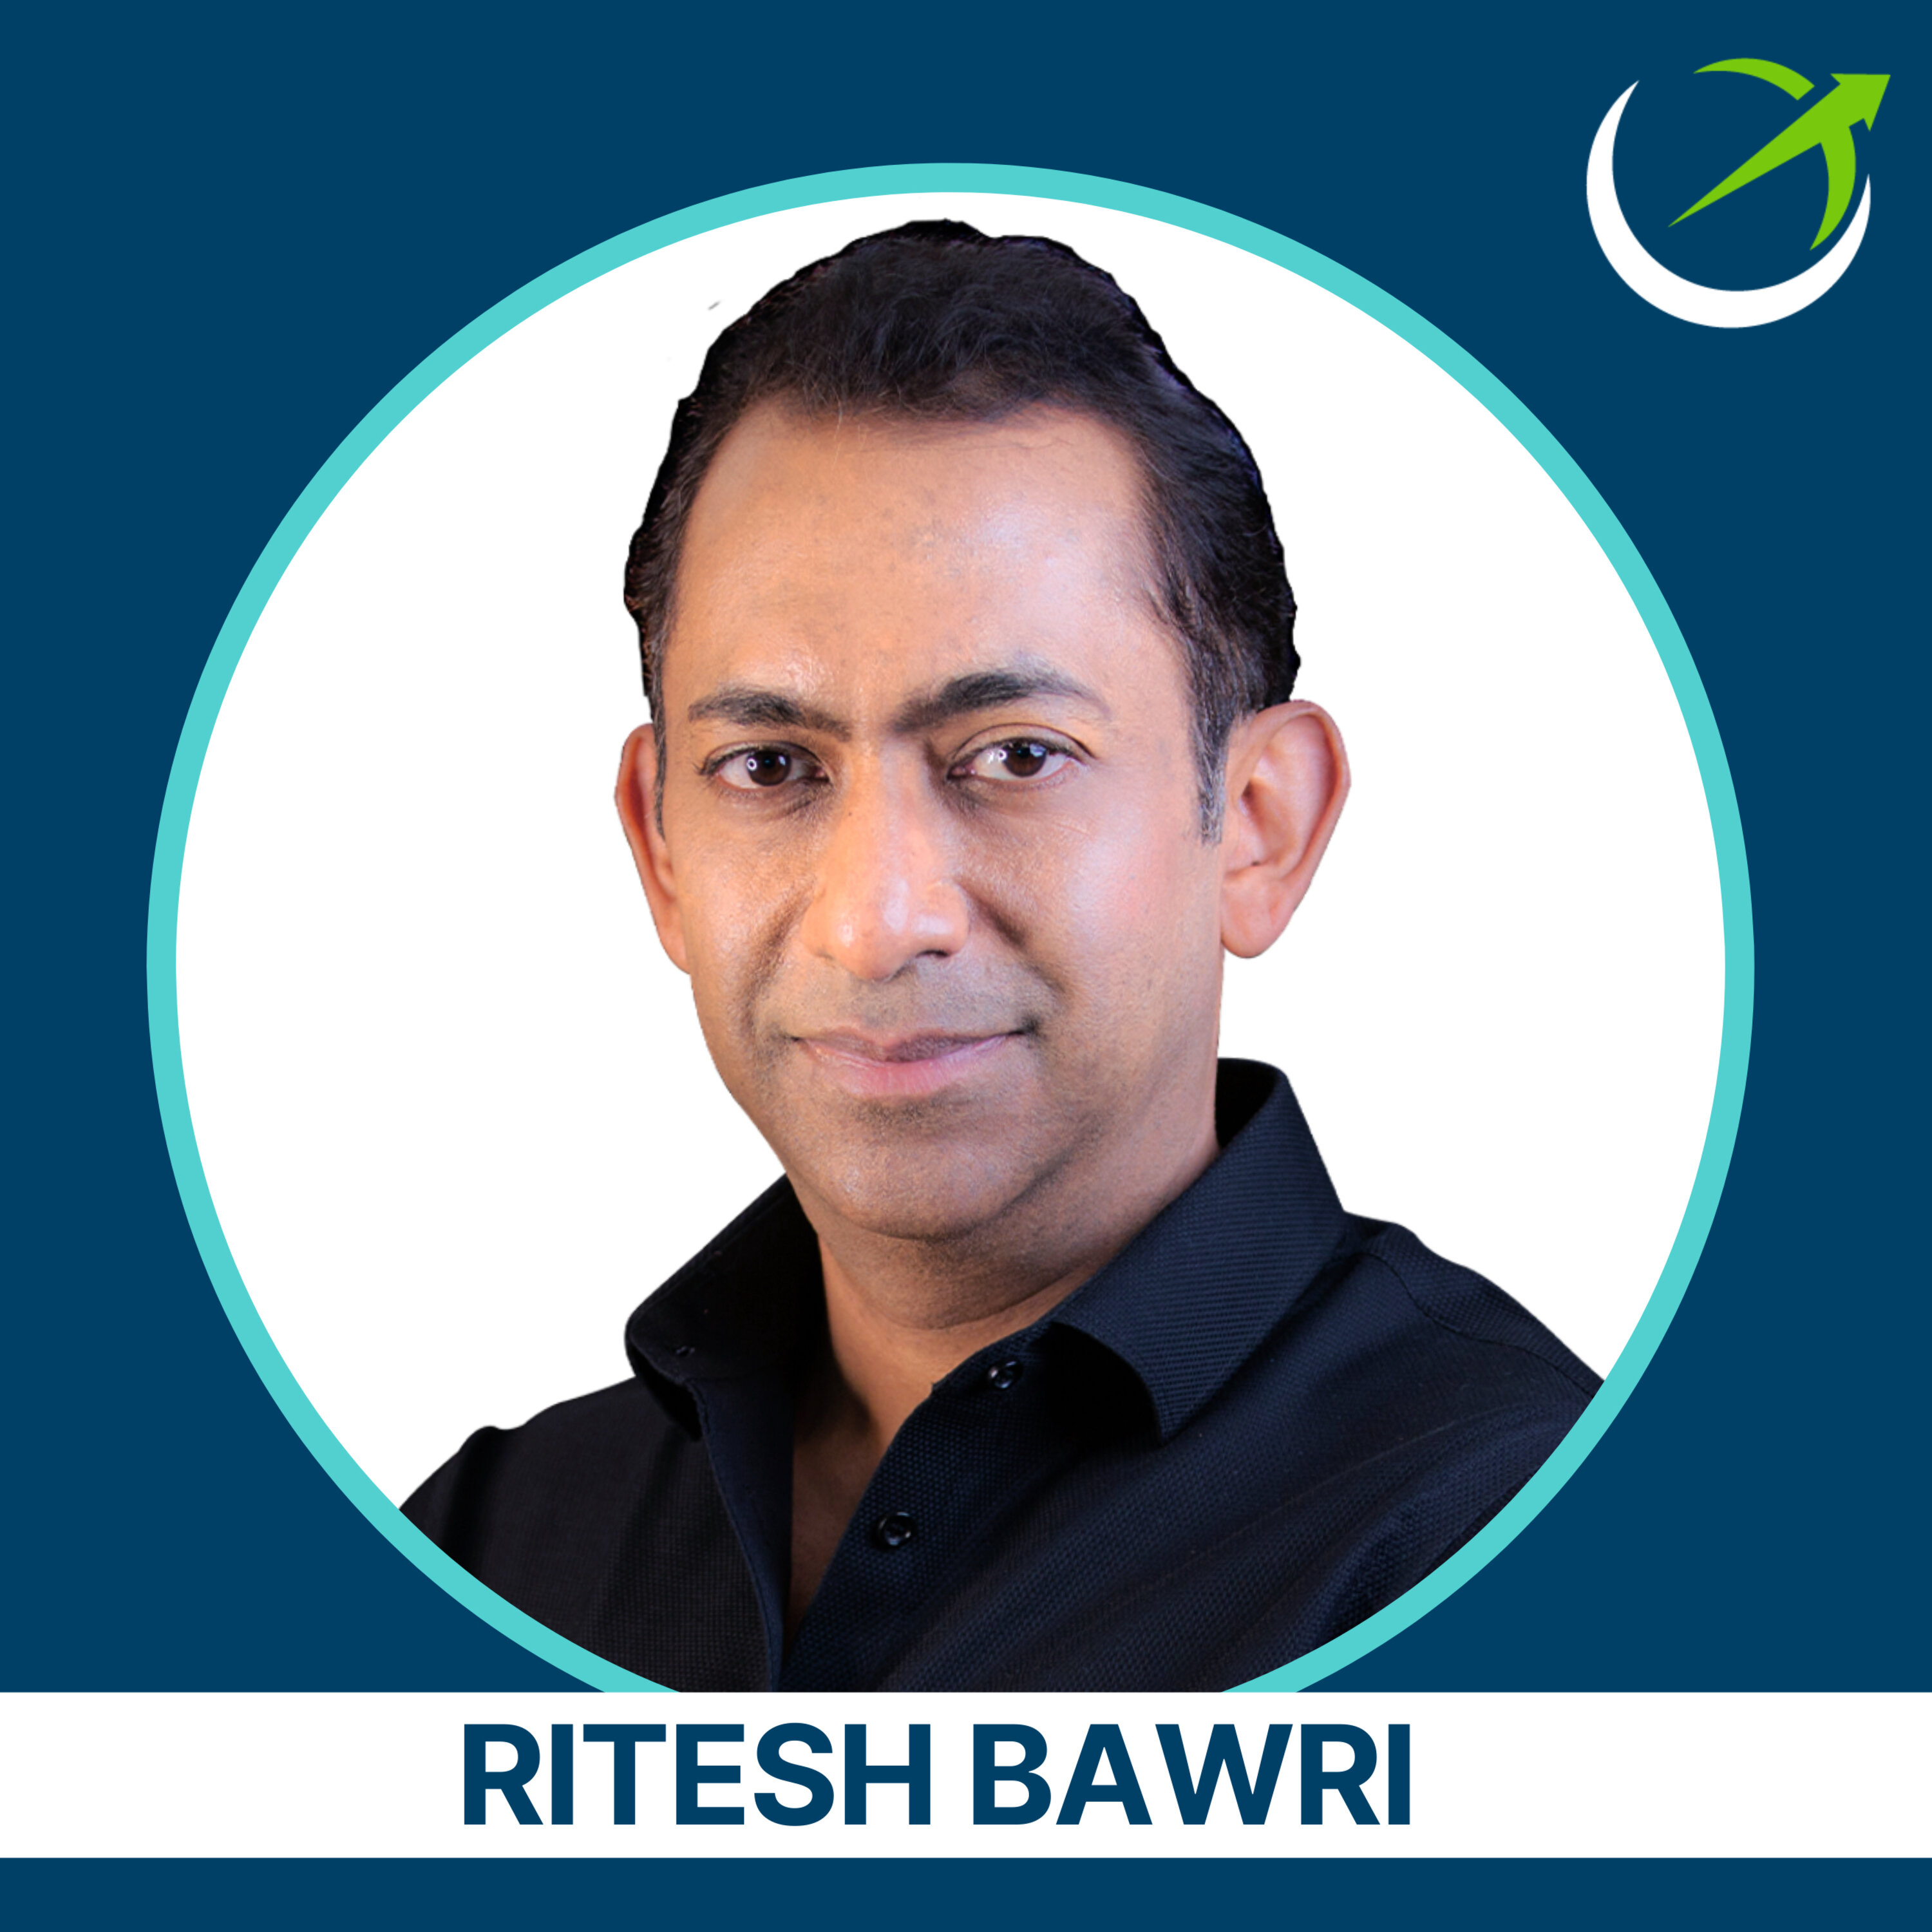 A Conversation With One Of India's Top Health Authors & Biohackers About Body Transformation, Air Pollution, The Magic of Ghee, Timed Meditation & Much More With Ritesh Bawri